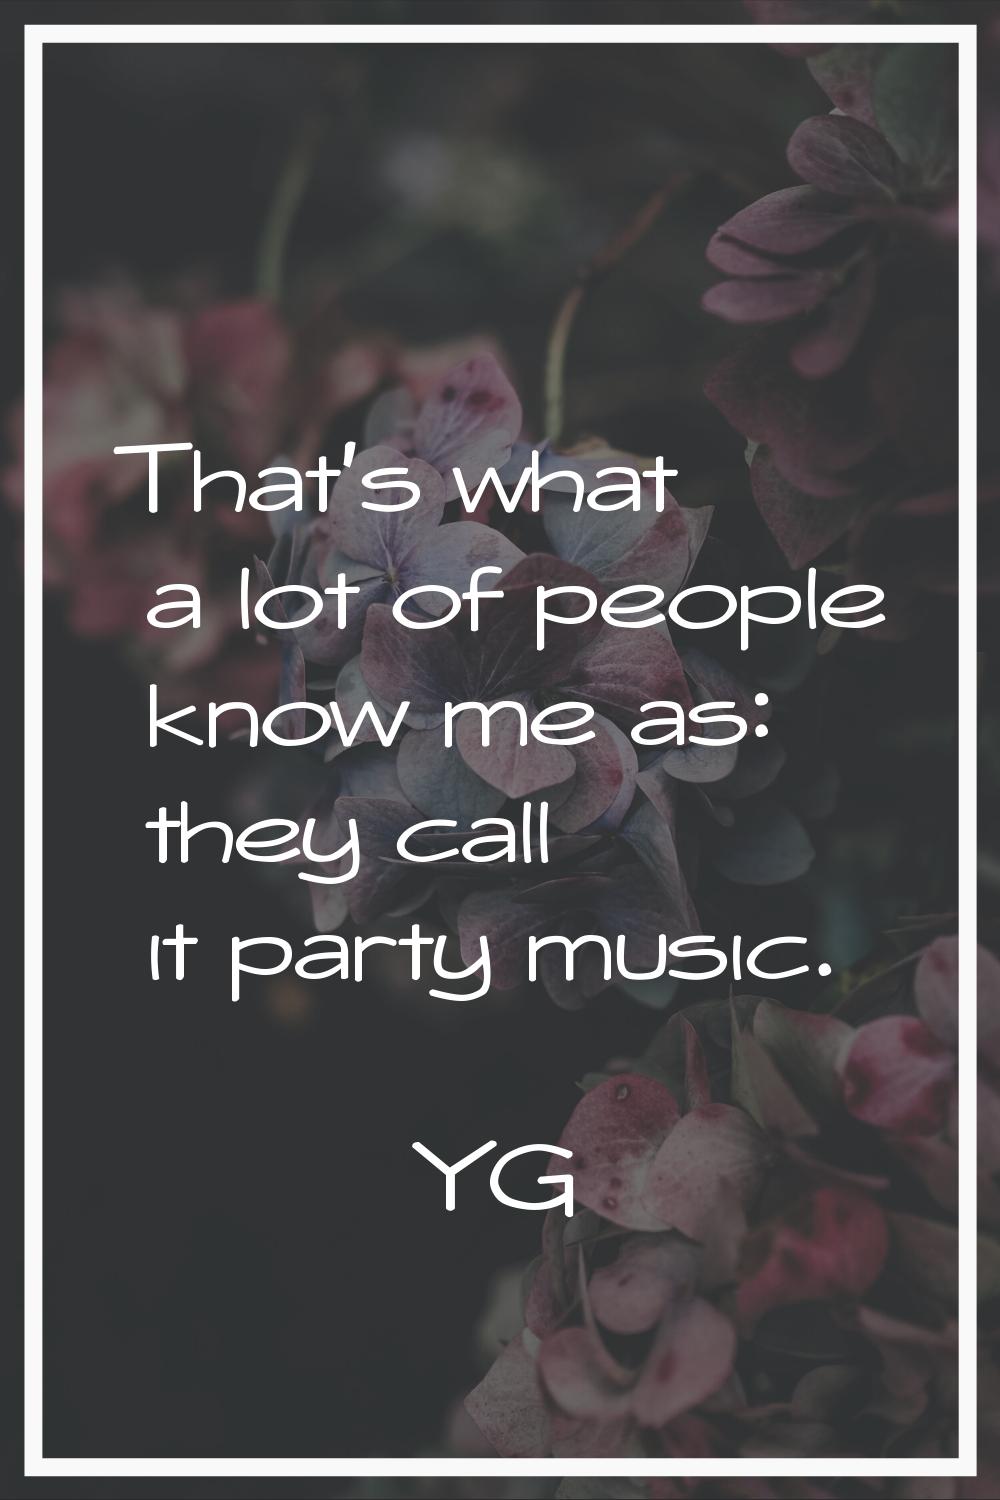 That's what a lot of people know me as: they call it party music.